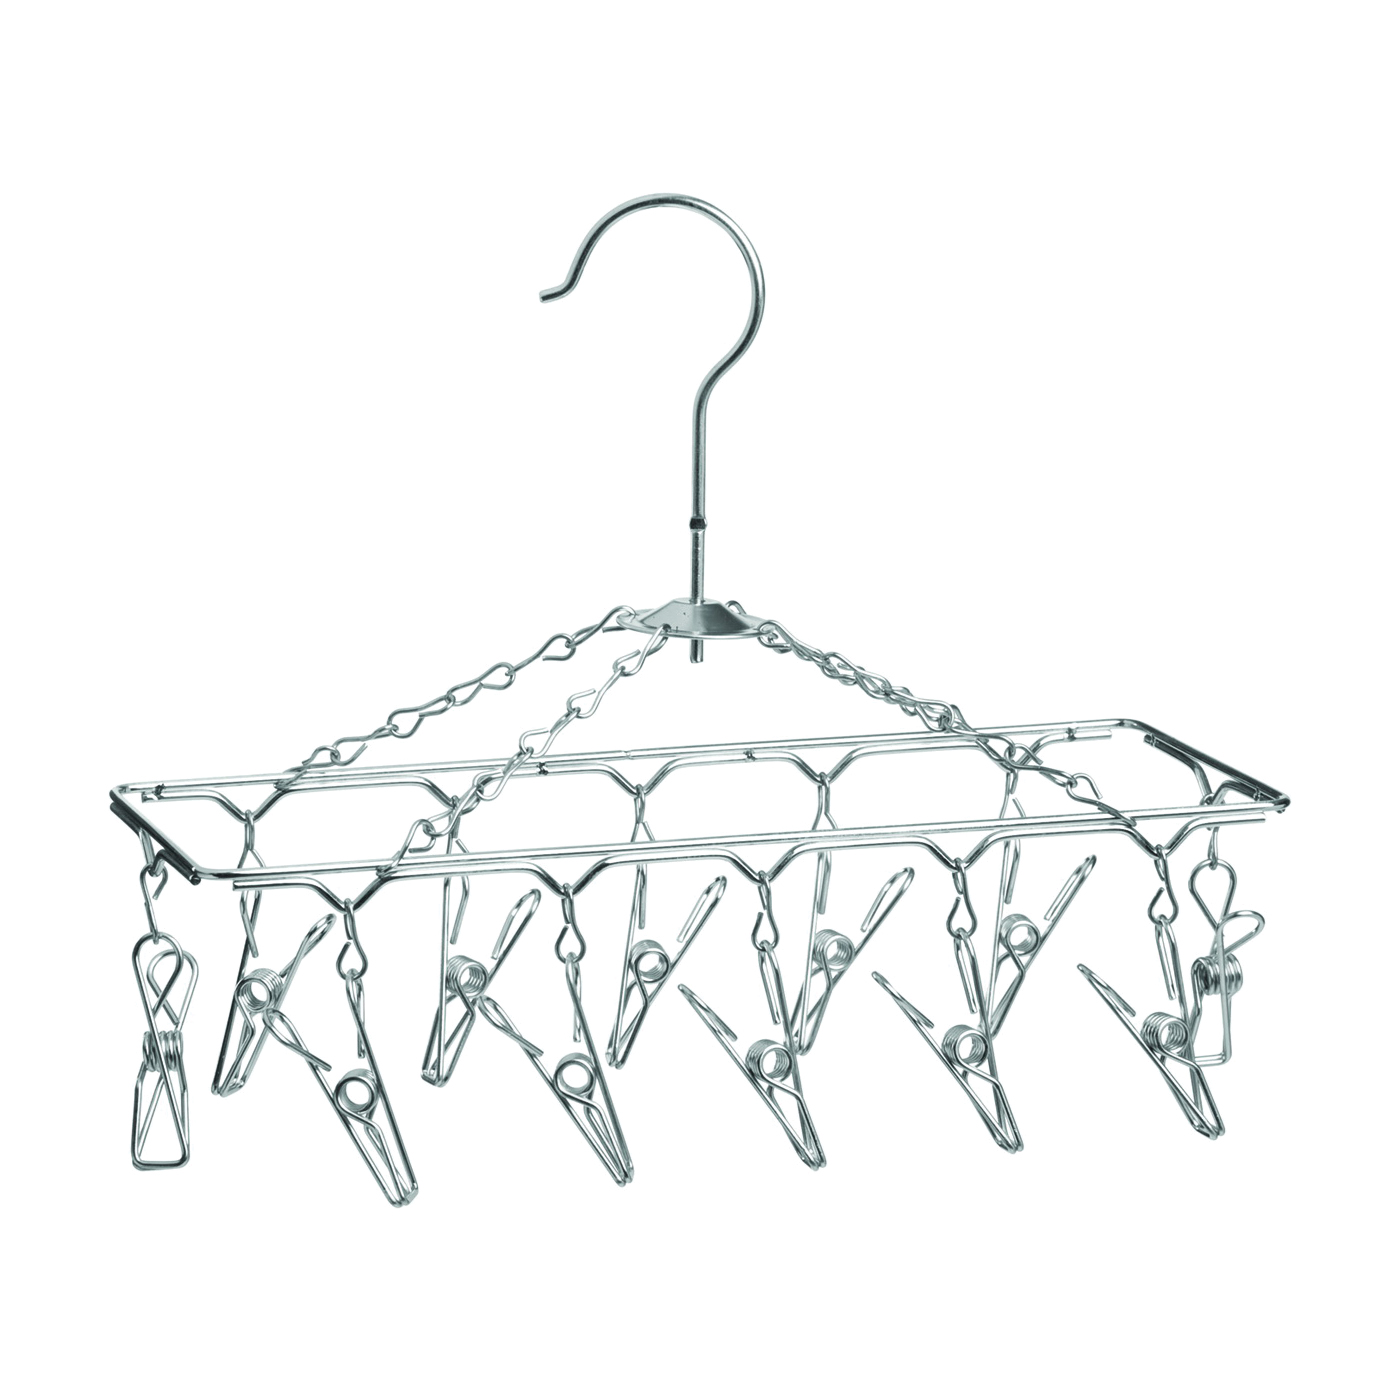 DRY-01102 Drying Rack, Stainless Steel, 11-3/4 in W, 6 in H, 4-3/4 in L